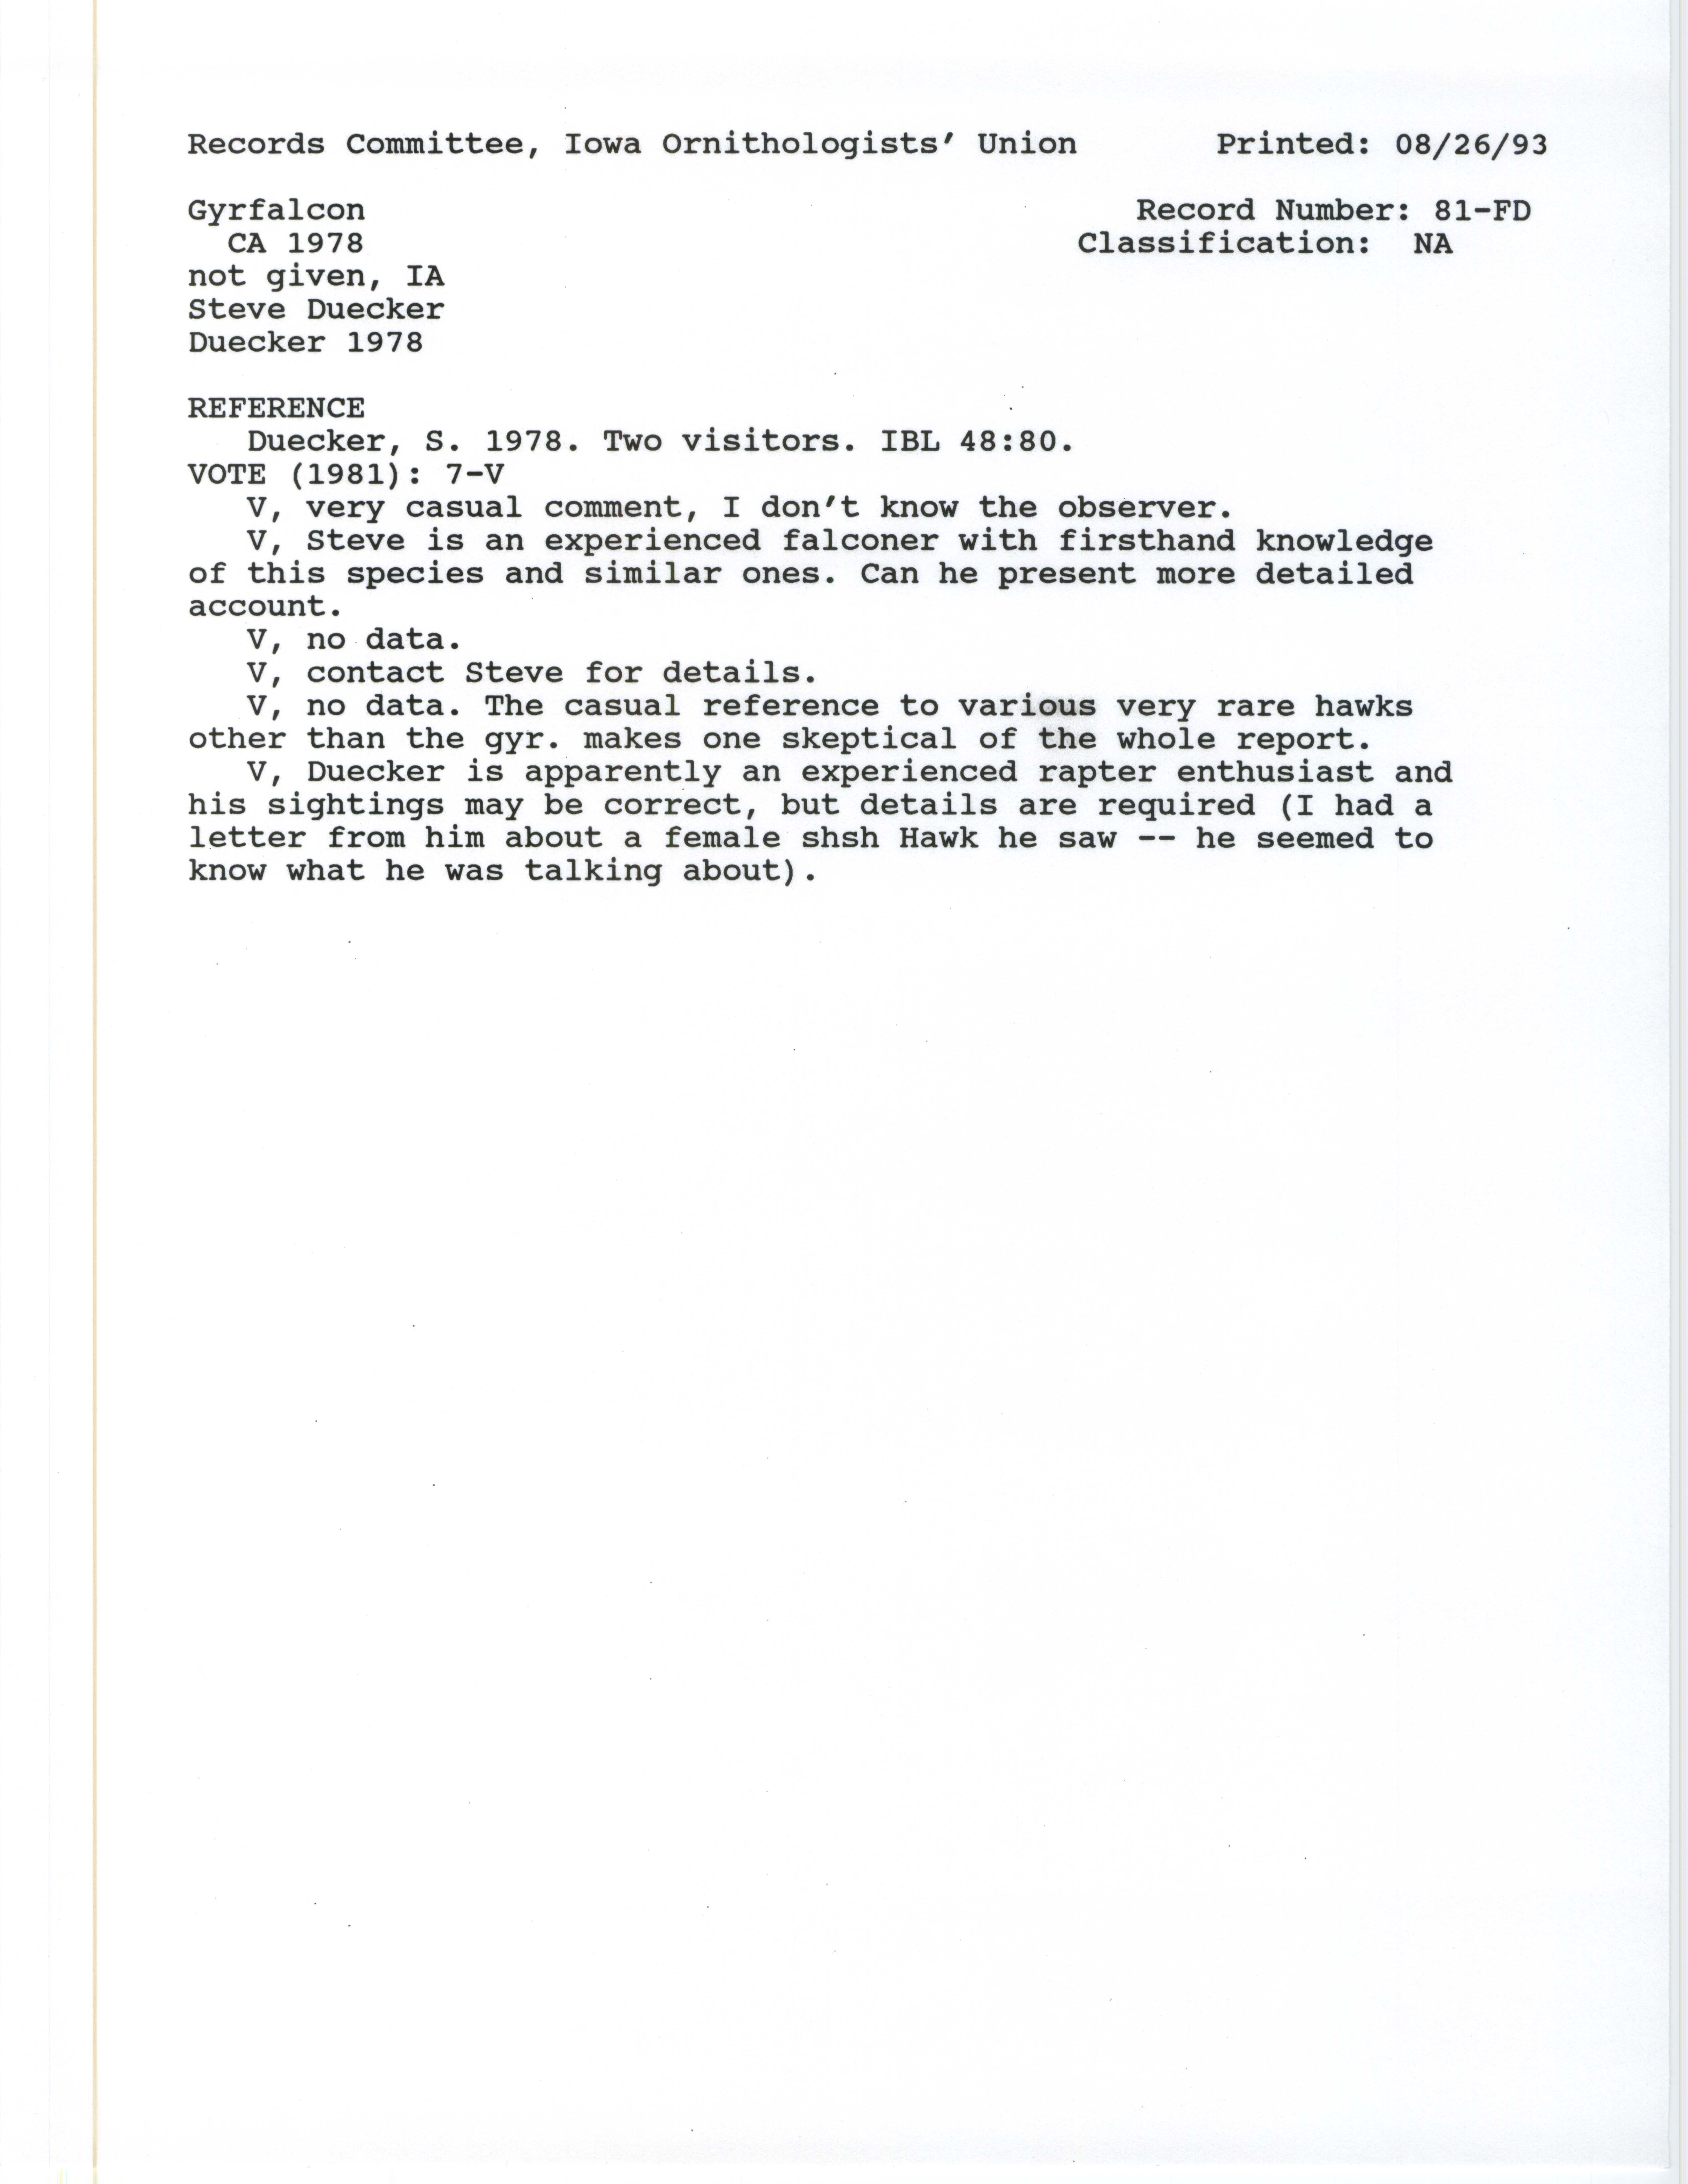 Records Committee review for rare bird sighting for Gyrfalcon in Western Iowa in 1978